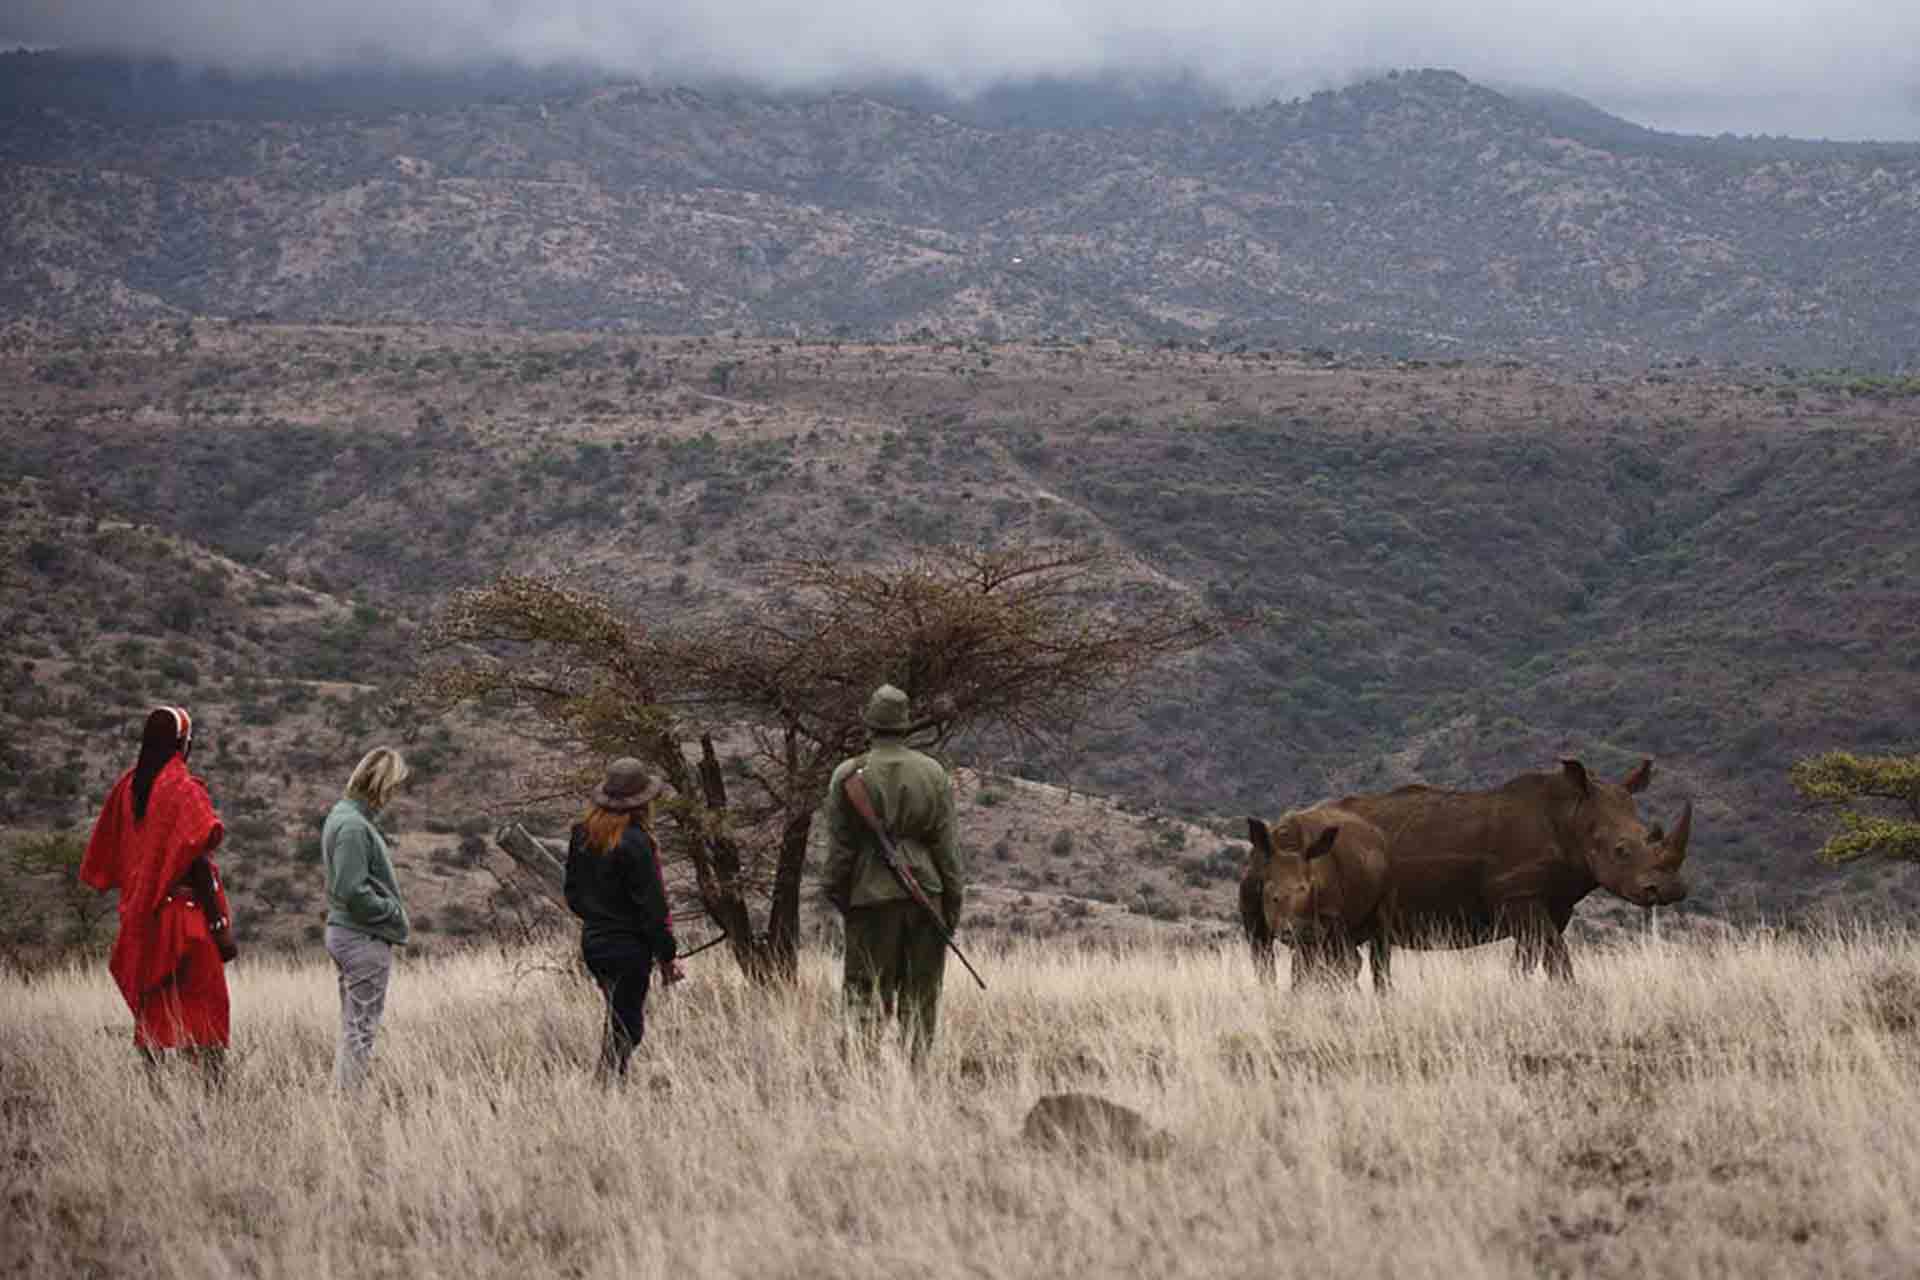 Rhino conservation in Lewa Conservancy